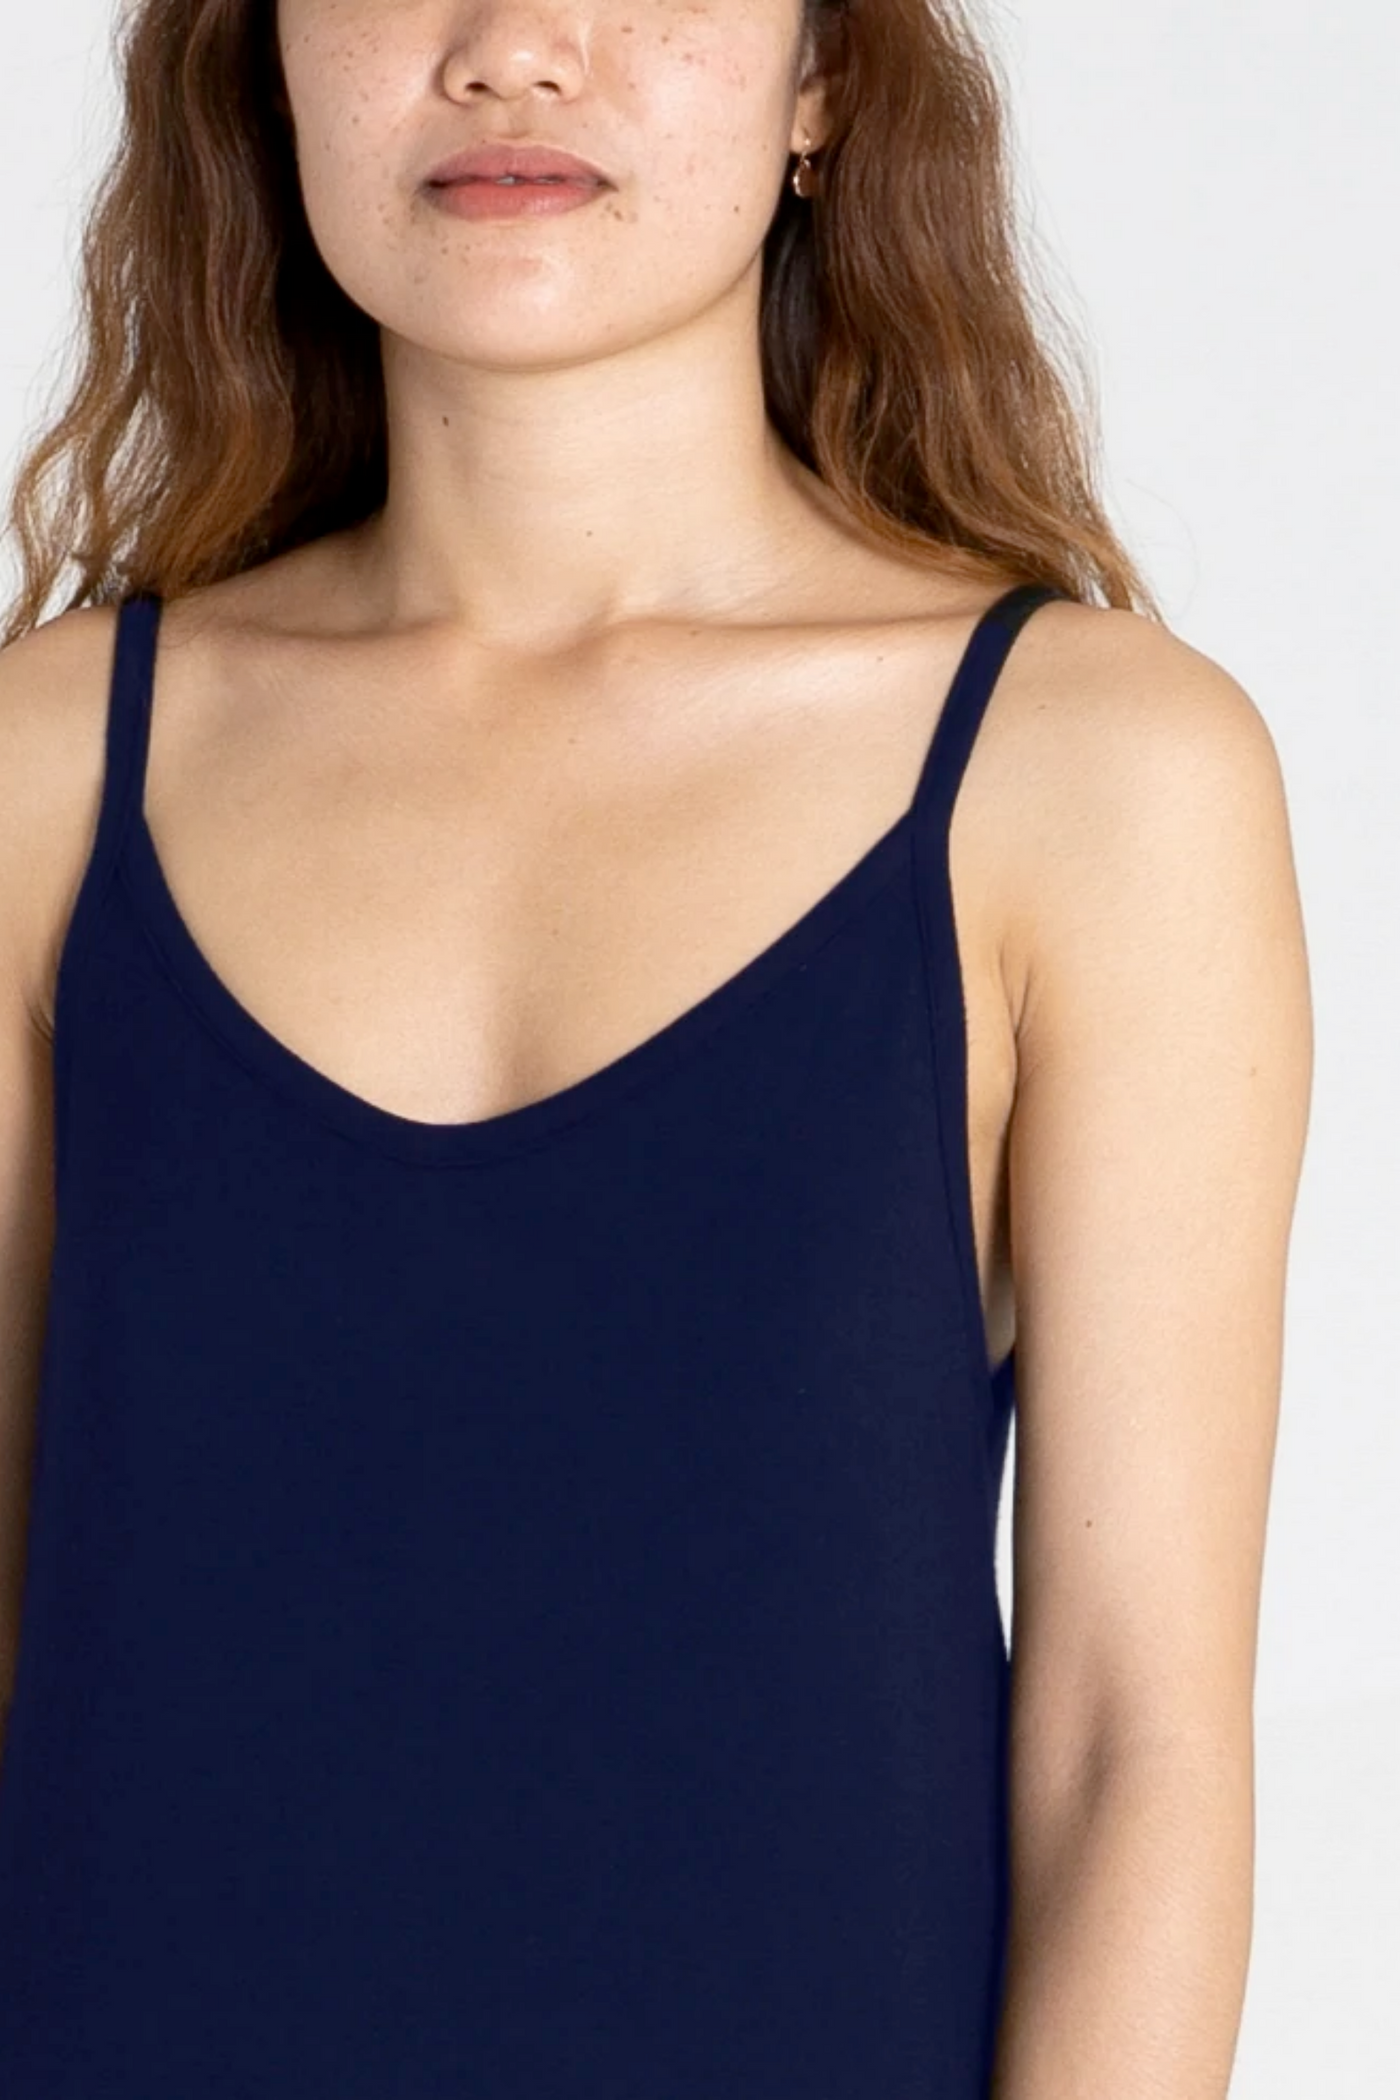 Dorsu Singlet Dress in Navy, available on ZERRIN with free Singapore shipping